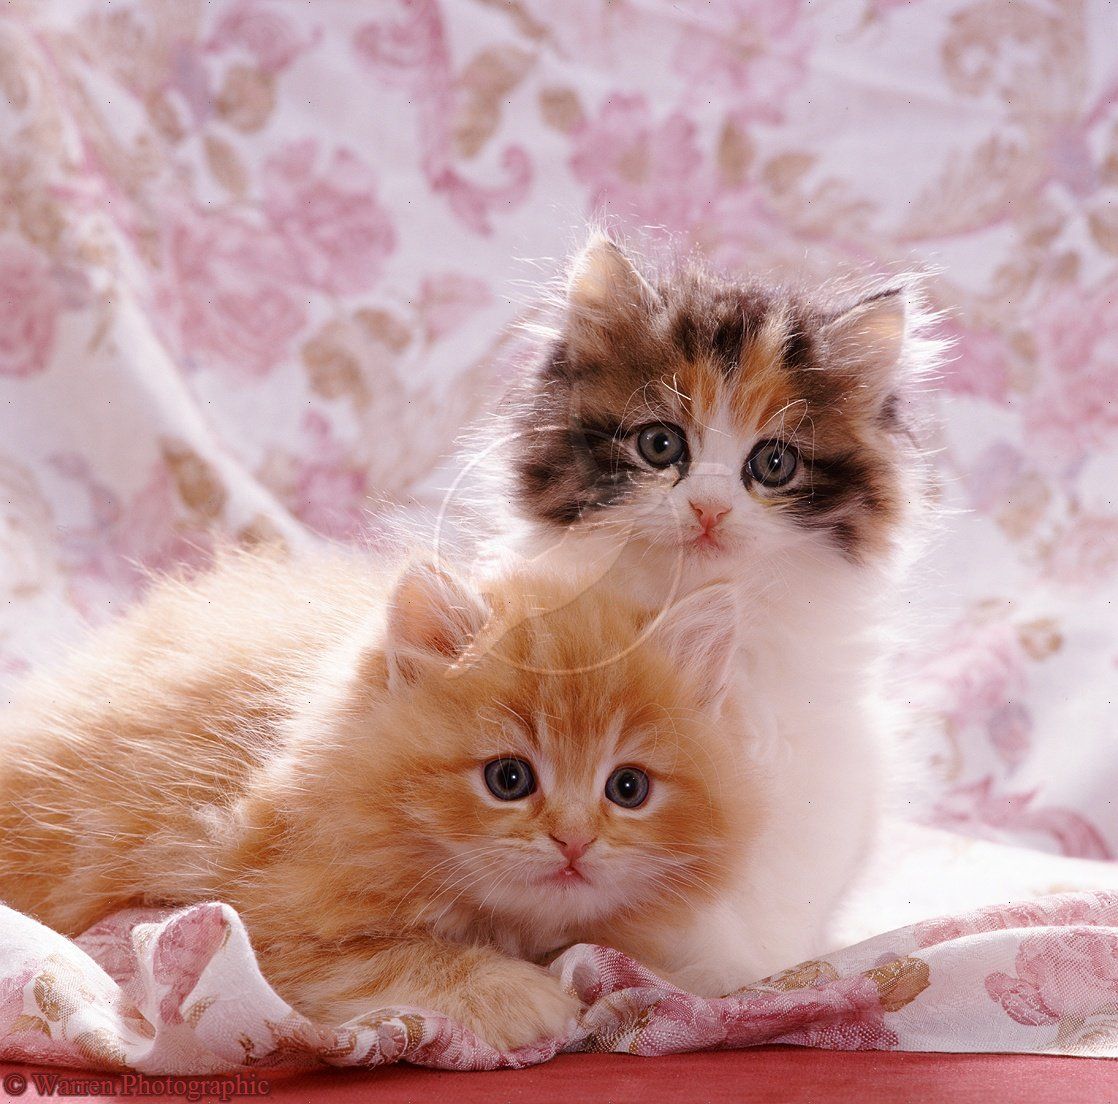 Cute Cats and Kittens Pictures and Wallpapers